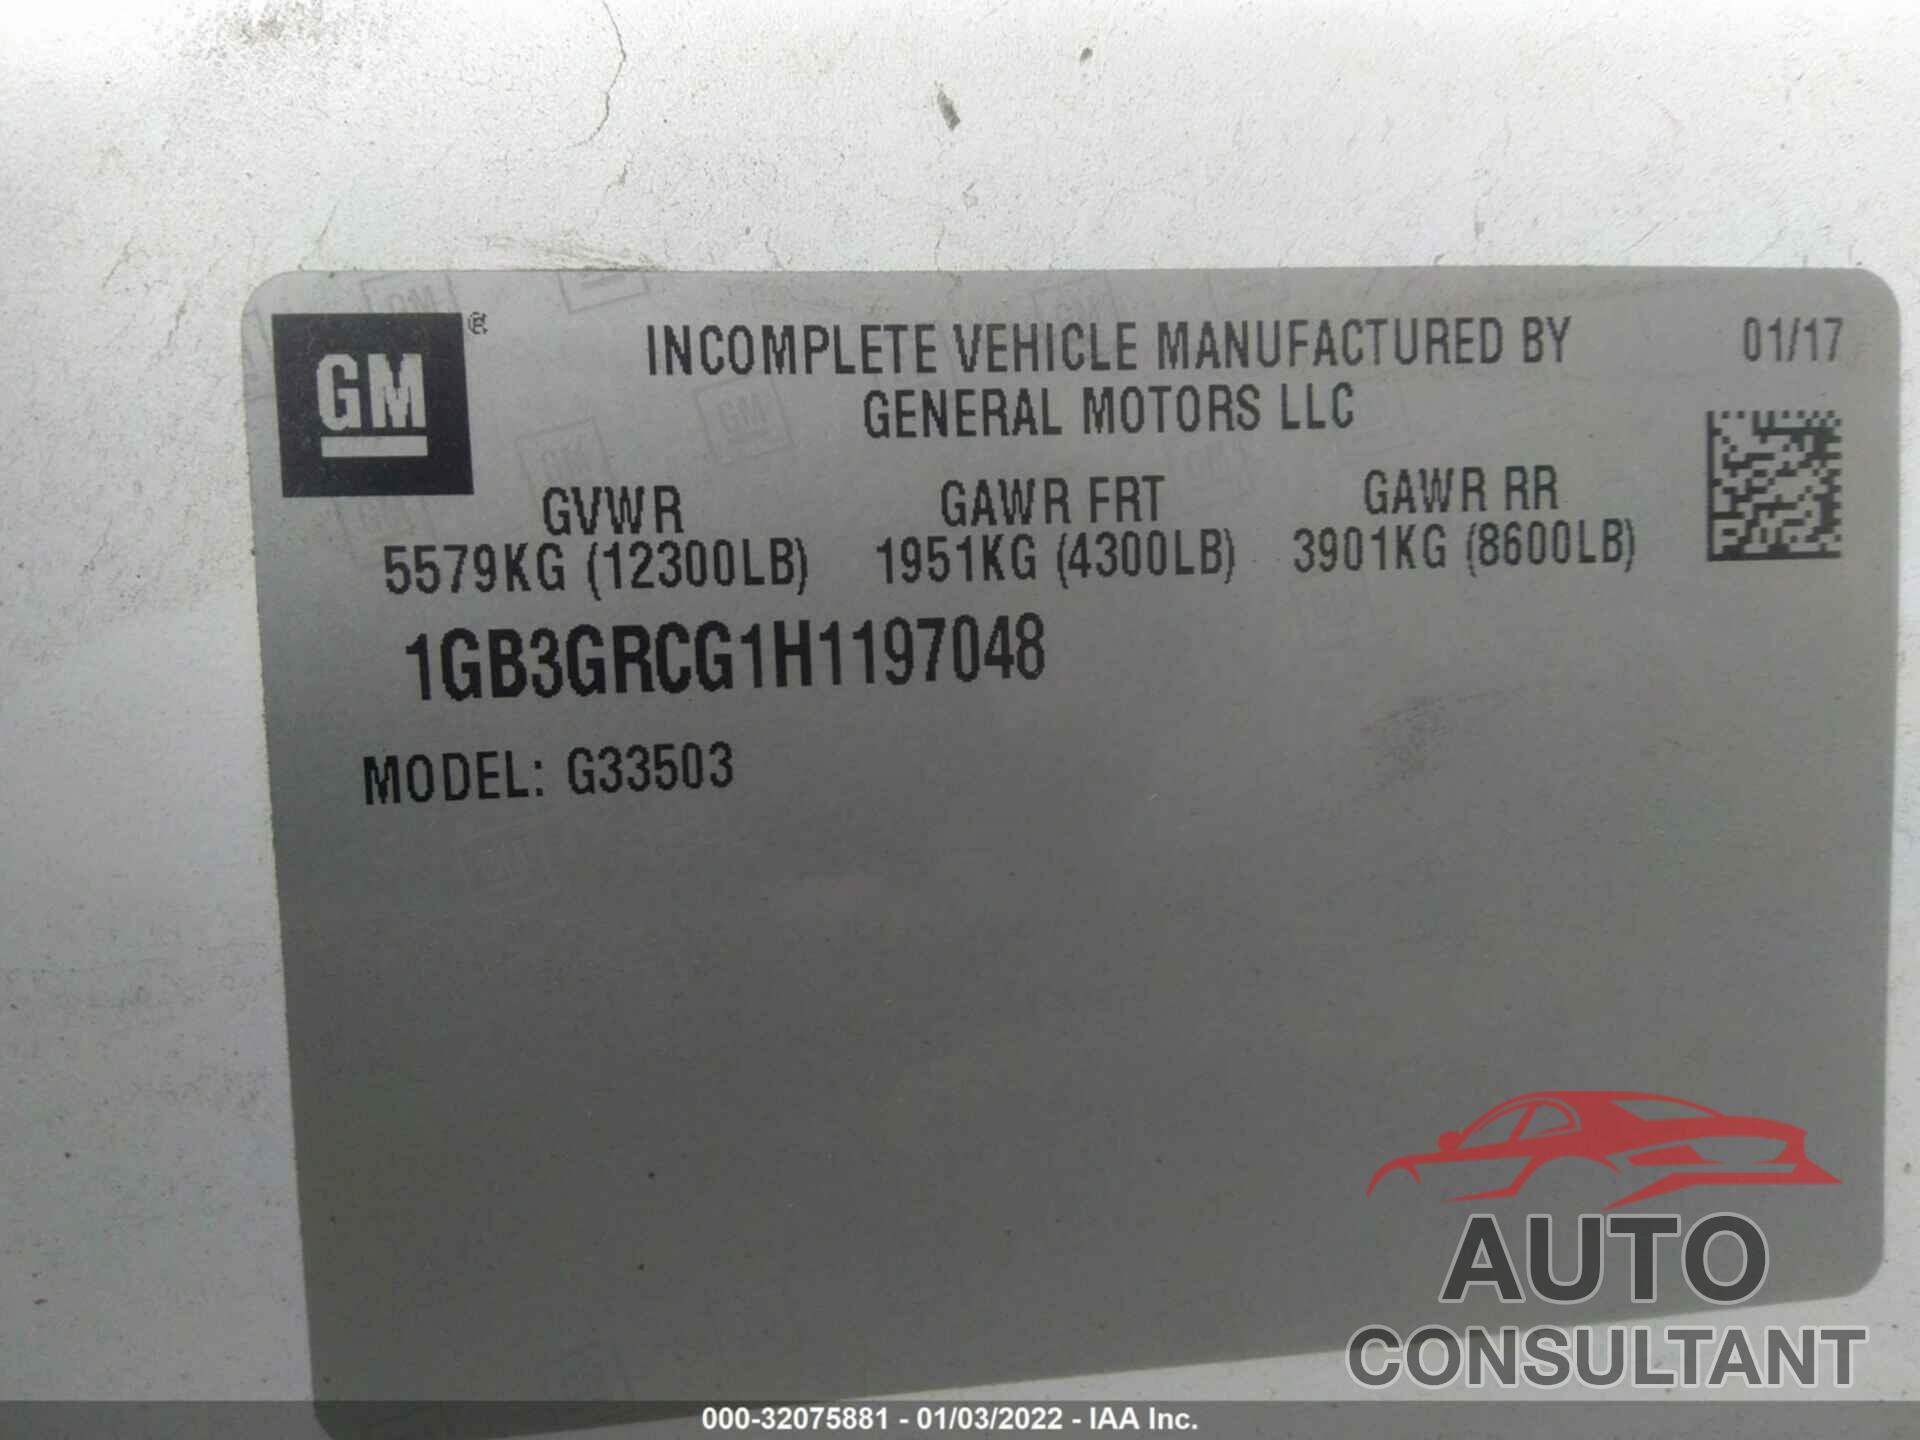 CHEVROLET EXPRESS COMMERCIAL 2017 - 1GB3GRCG1H1197048